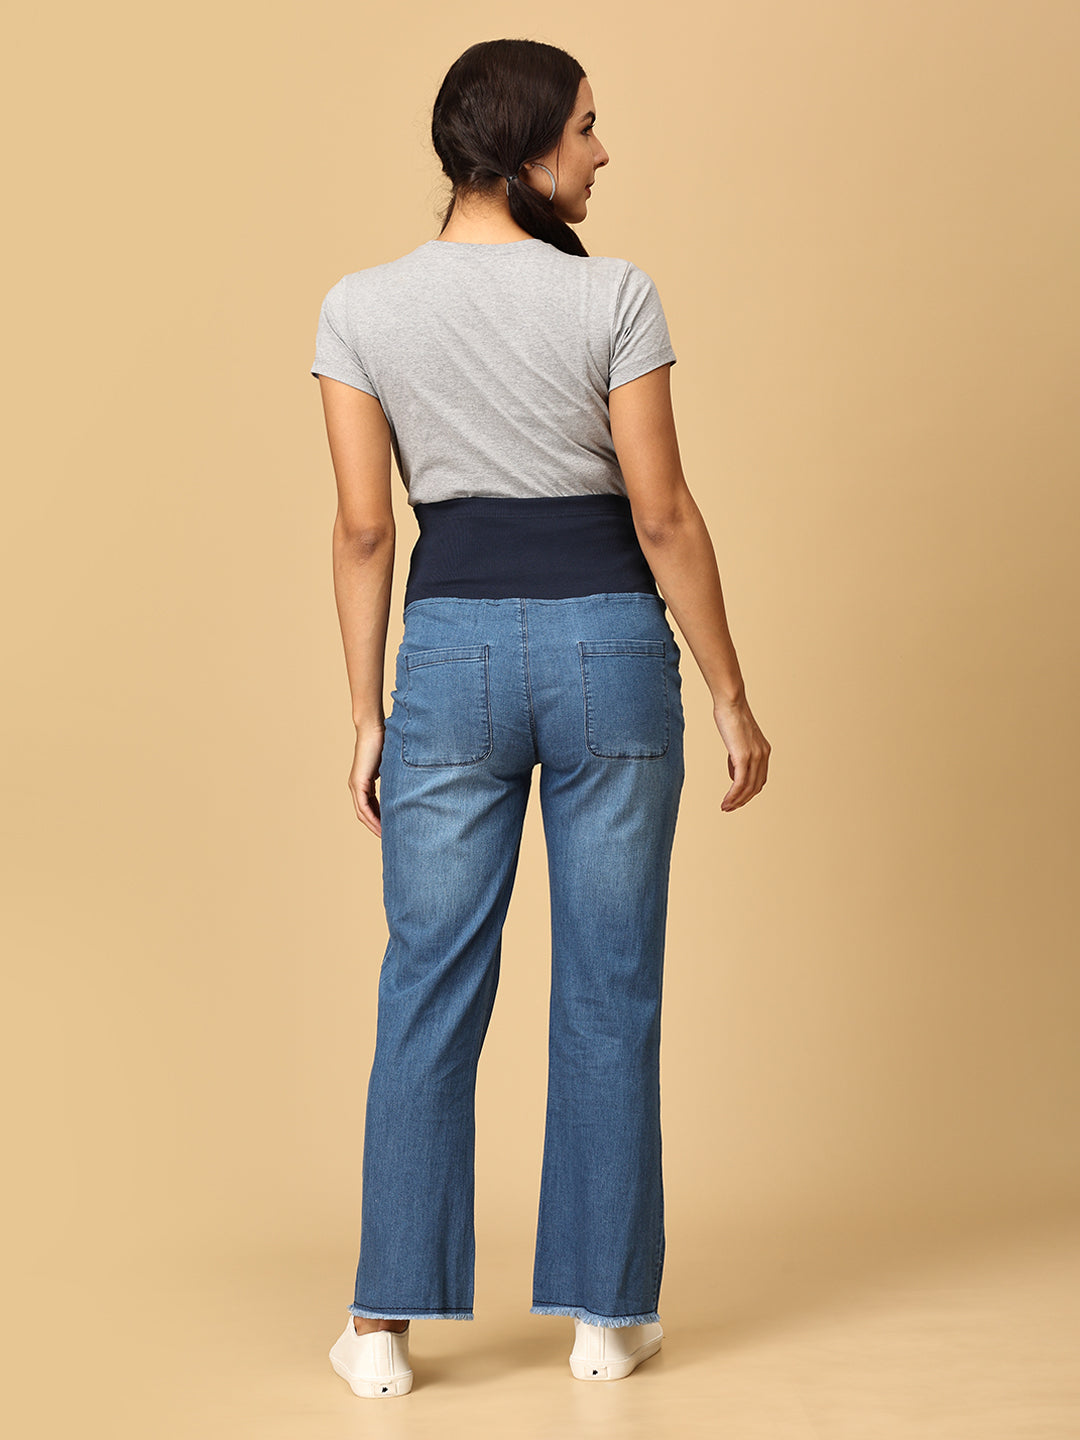 Wide Leg Maternity Denim with Belly Support